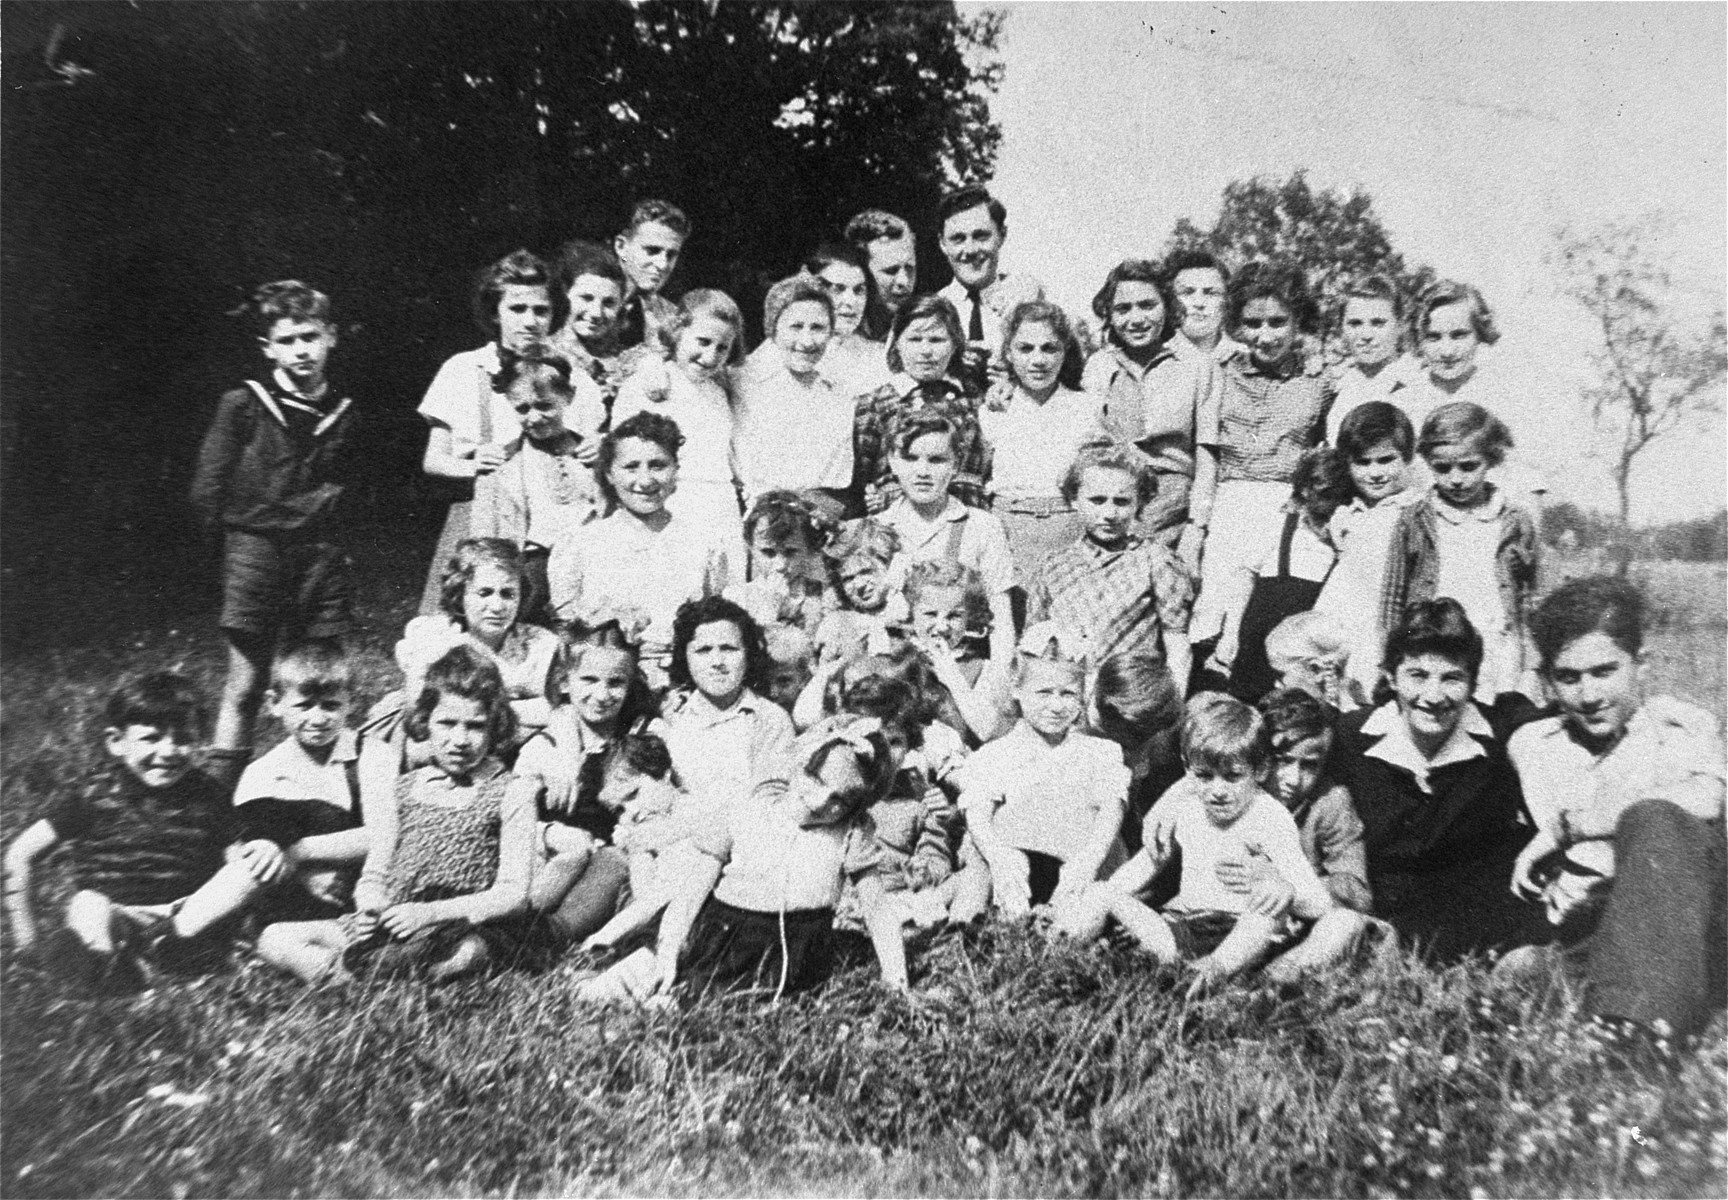 A group photograph of children in the Bergen-Belsen displaced persons' camp in 1946.